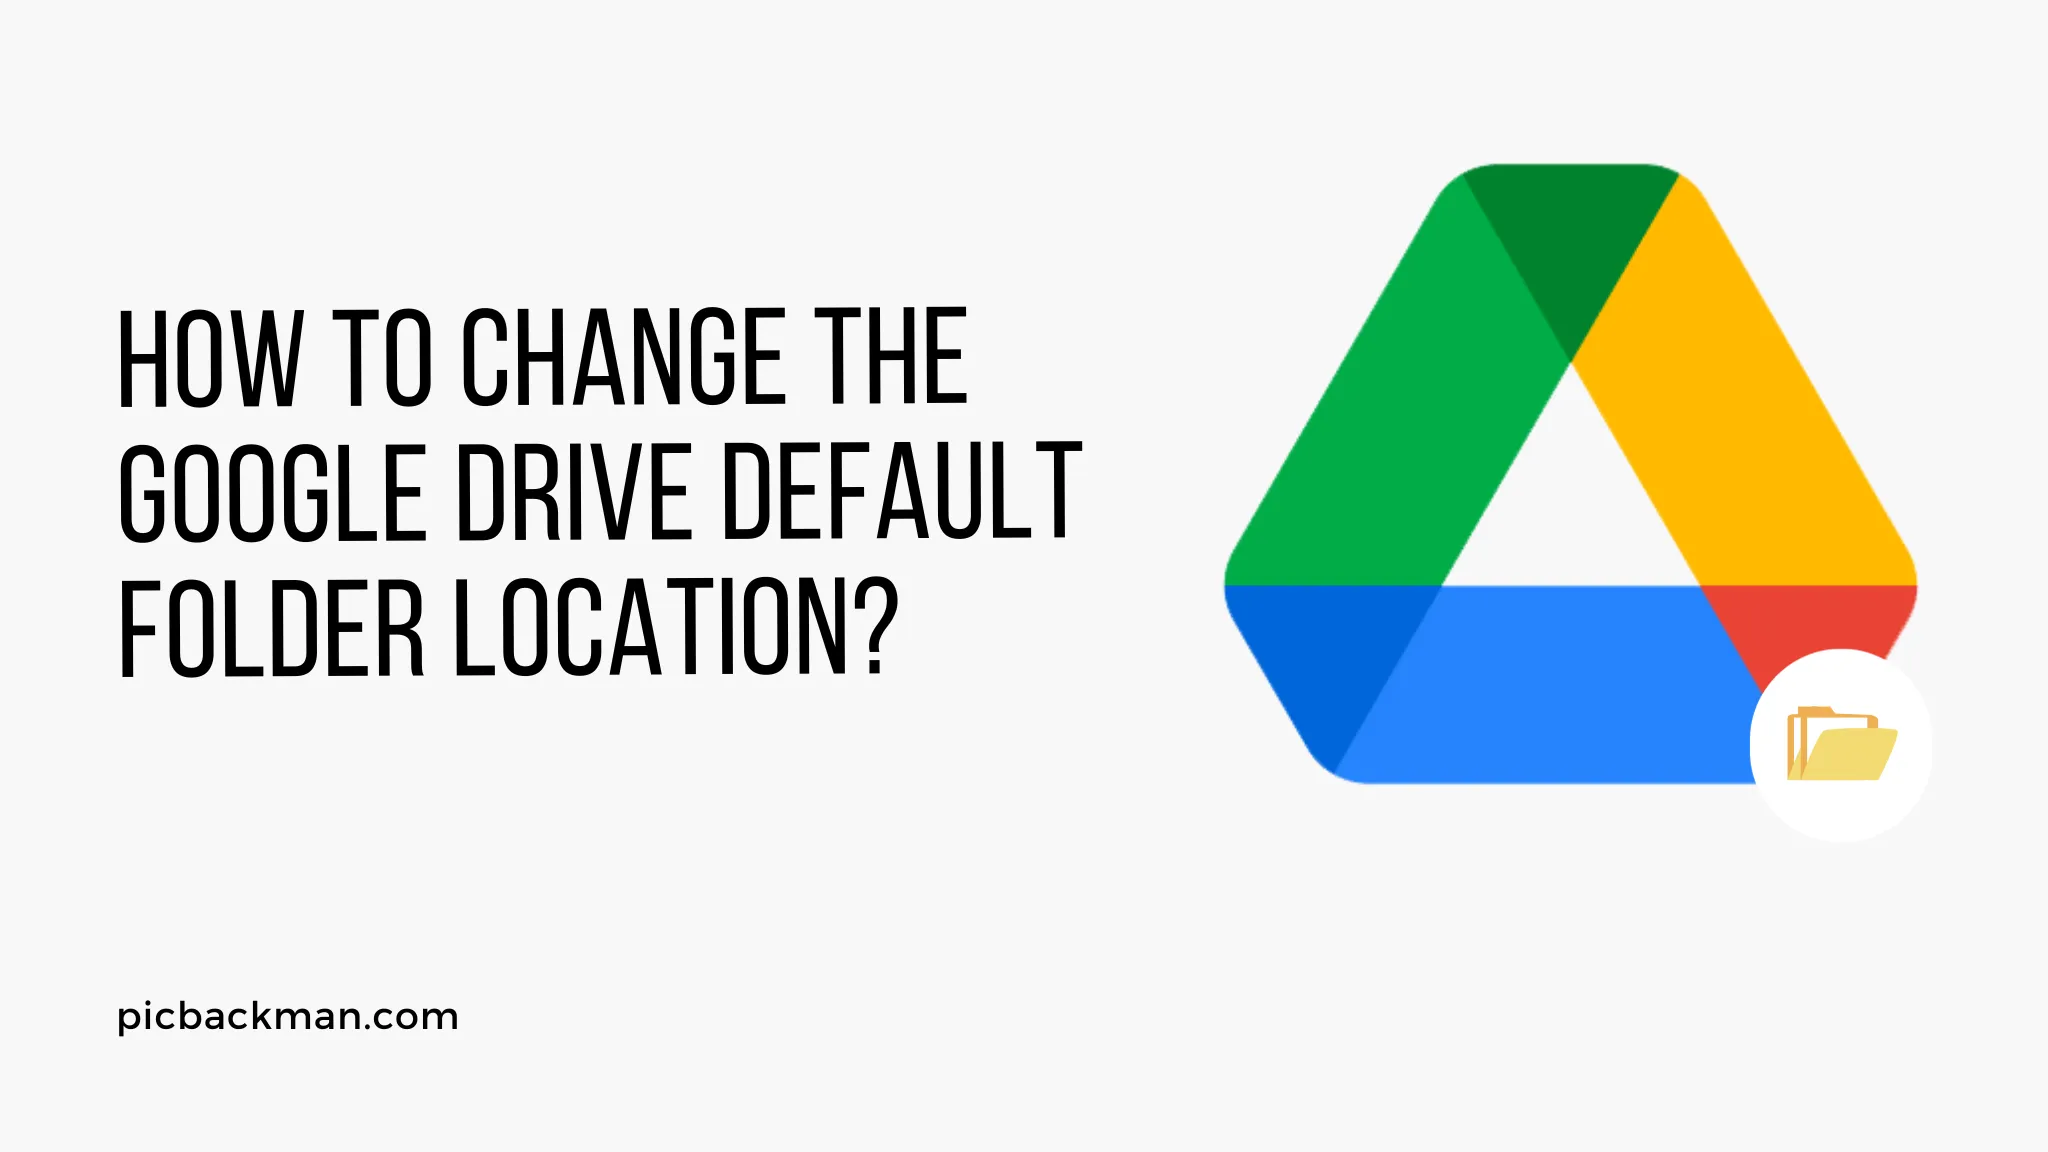 How to Change the Google Drive Default Folder Location?